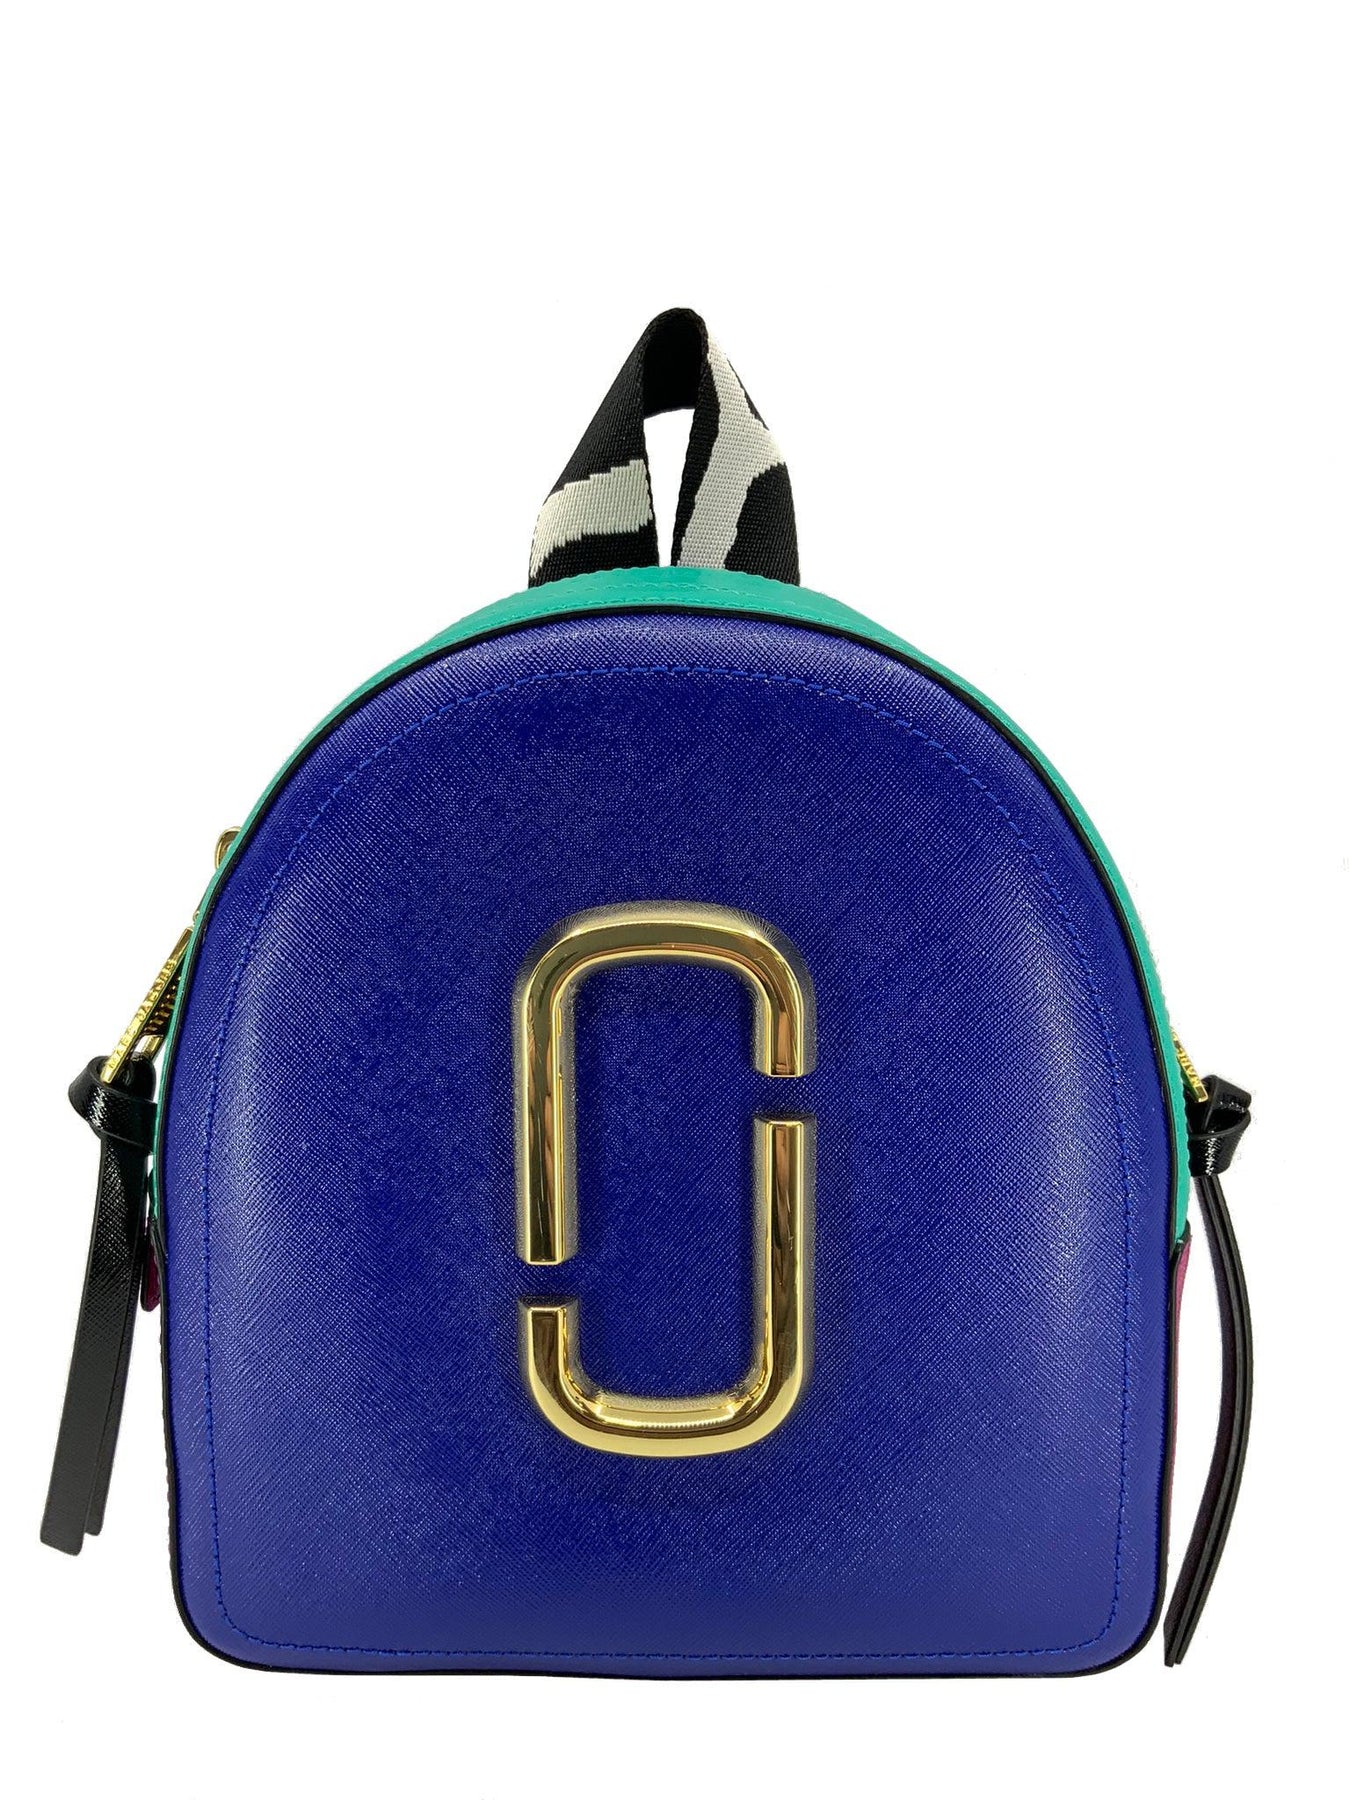 MARC JACOBS Backpack Leather The Pack Shot Backpack Mini Bag